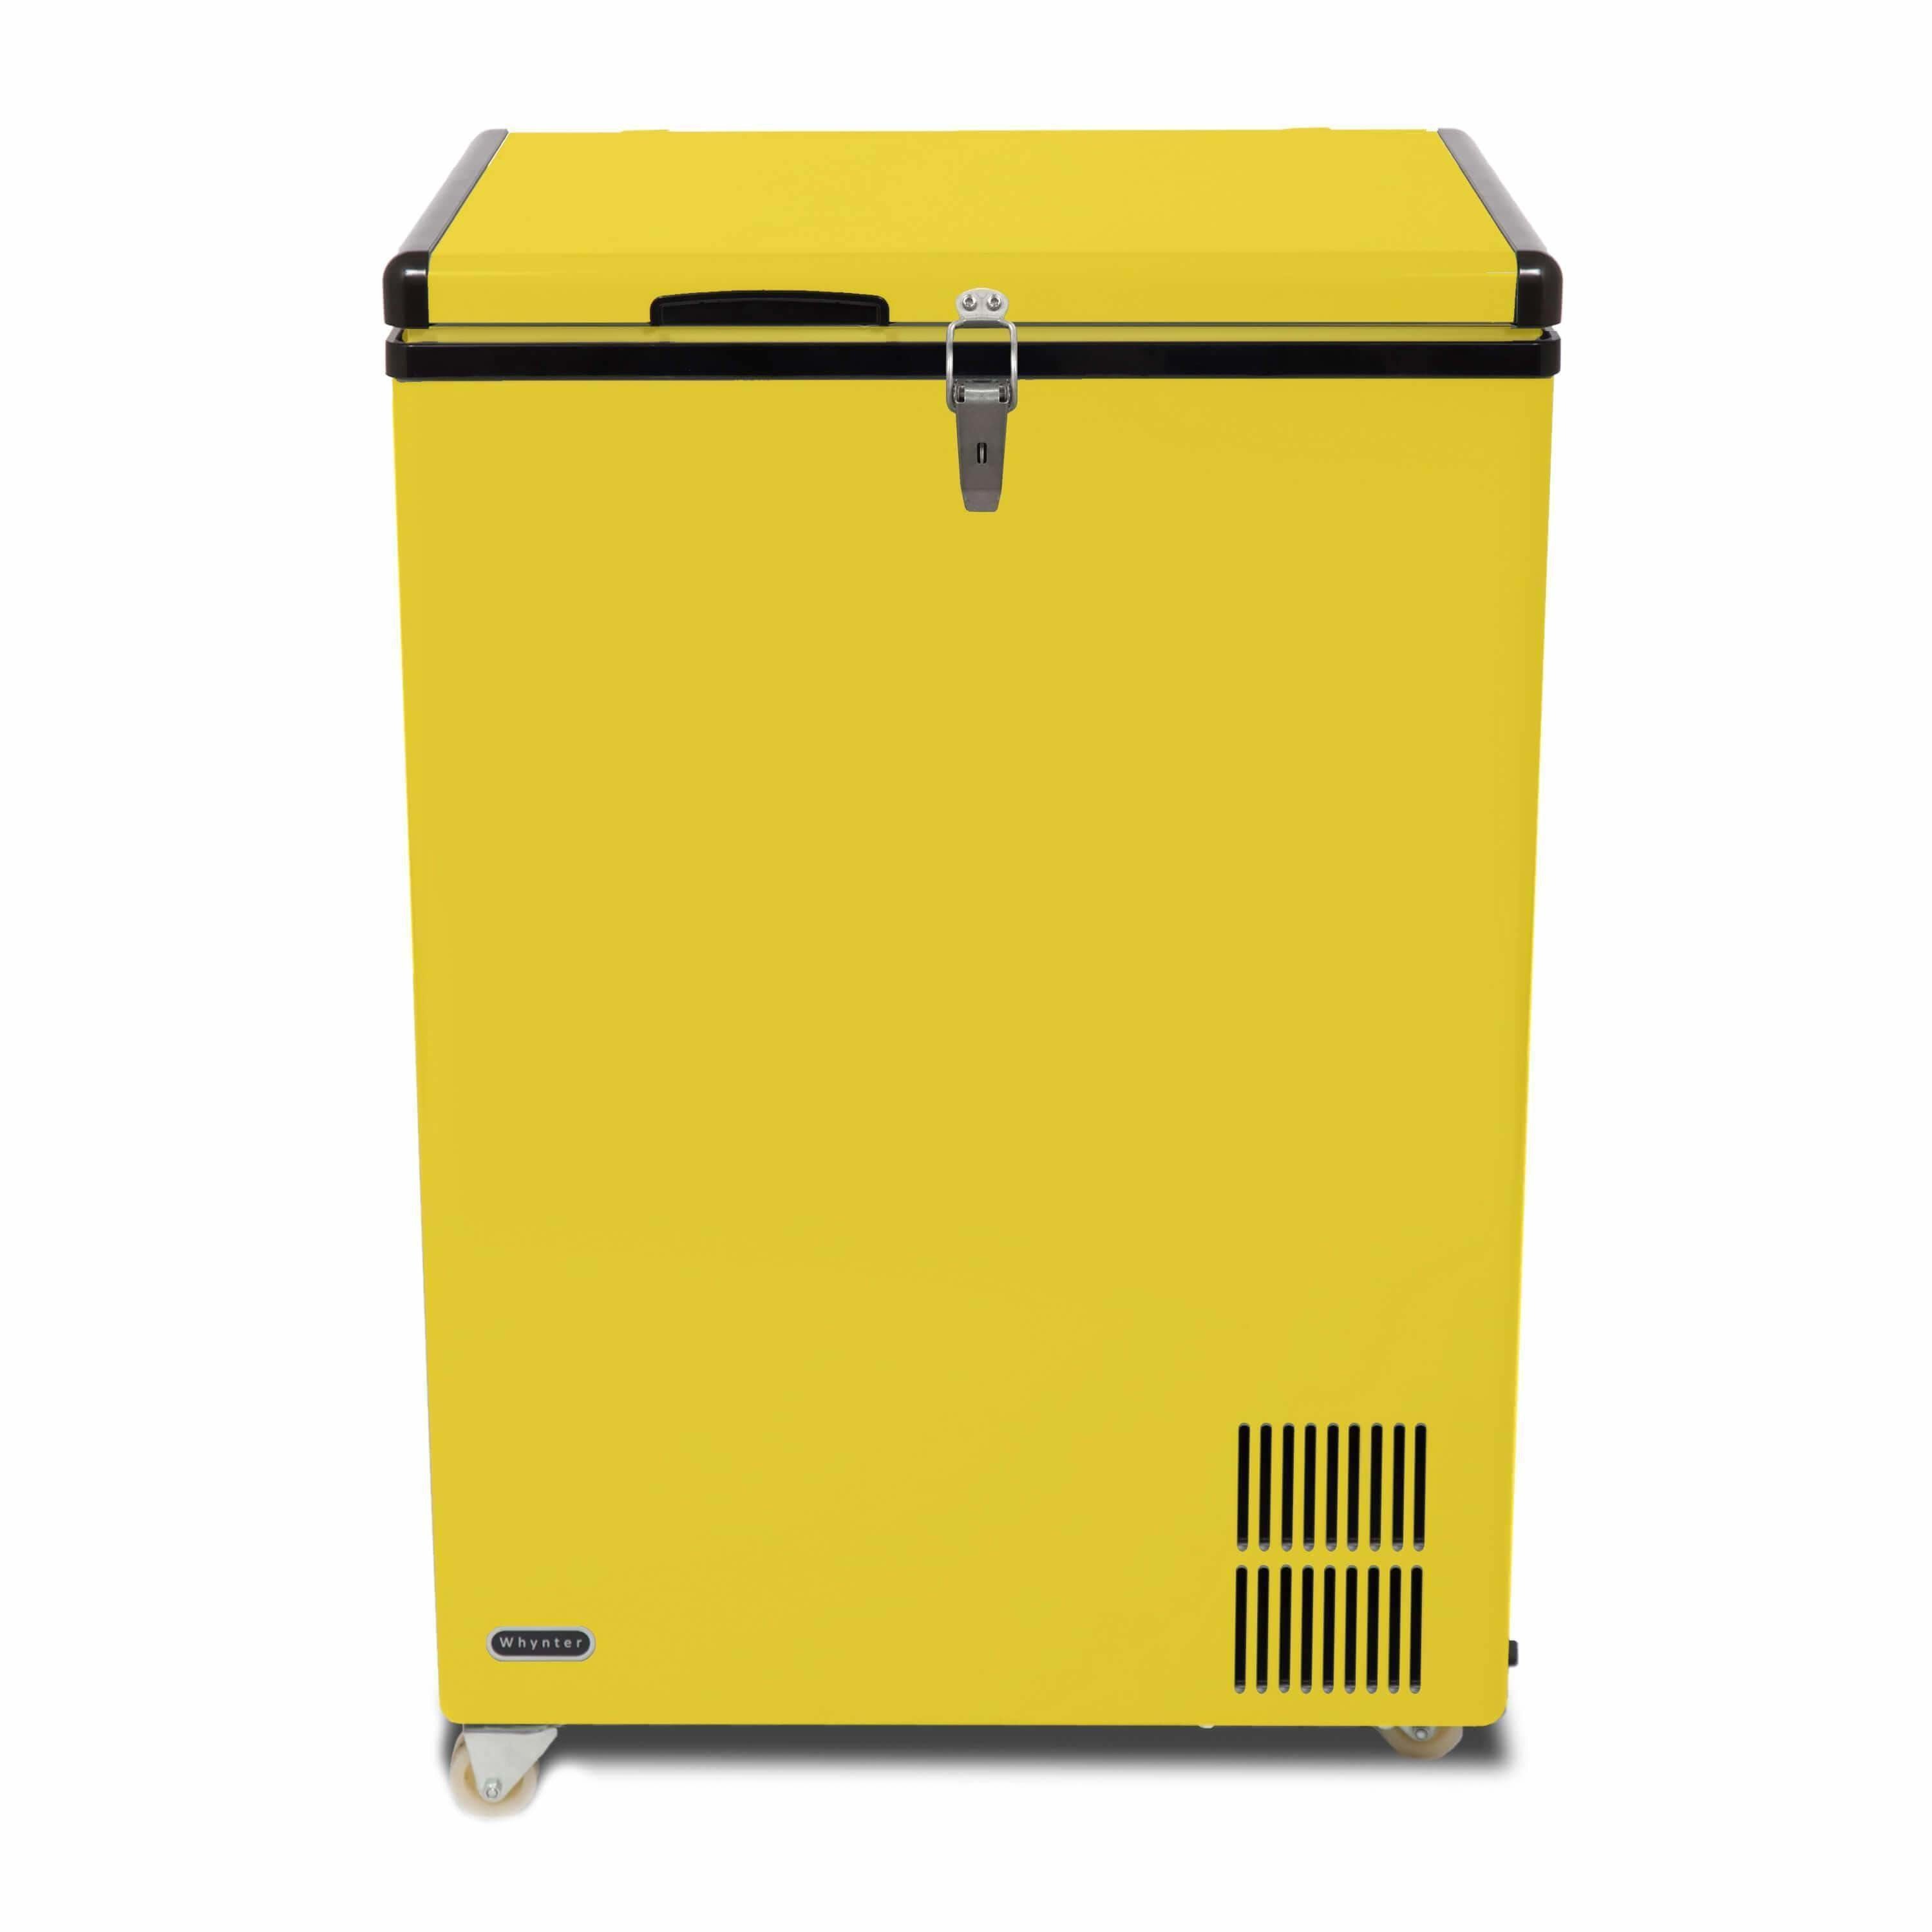 Whynter 95 Quart Portable Fridge / Freezer - Limited Edition Yellow FM-951YW Wine Coolers Empire